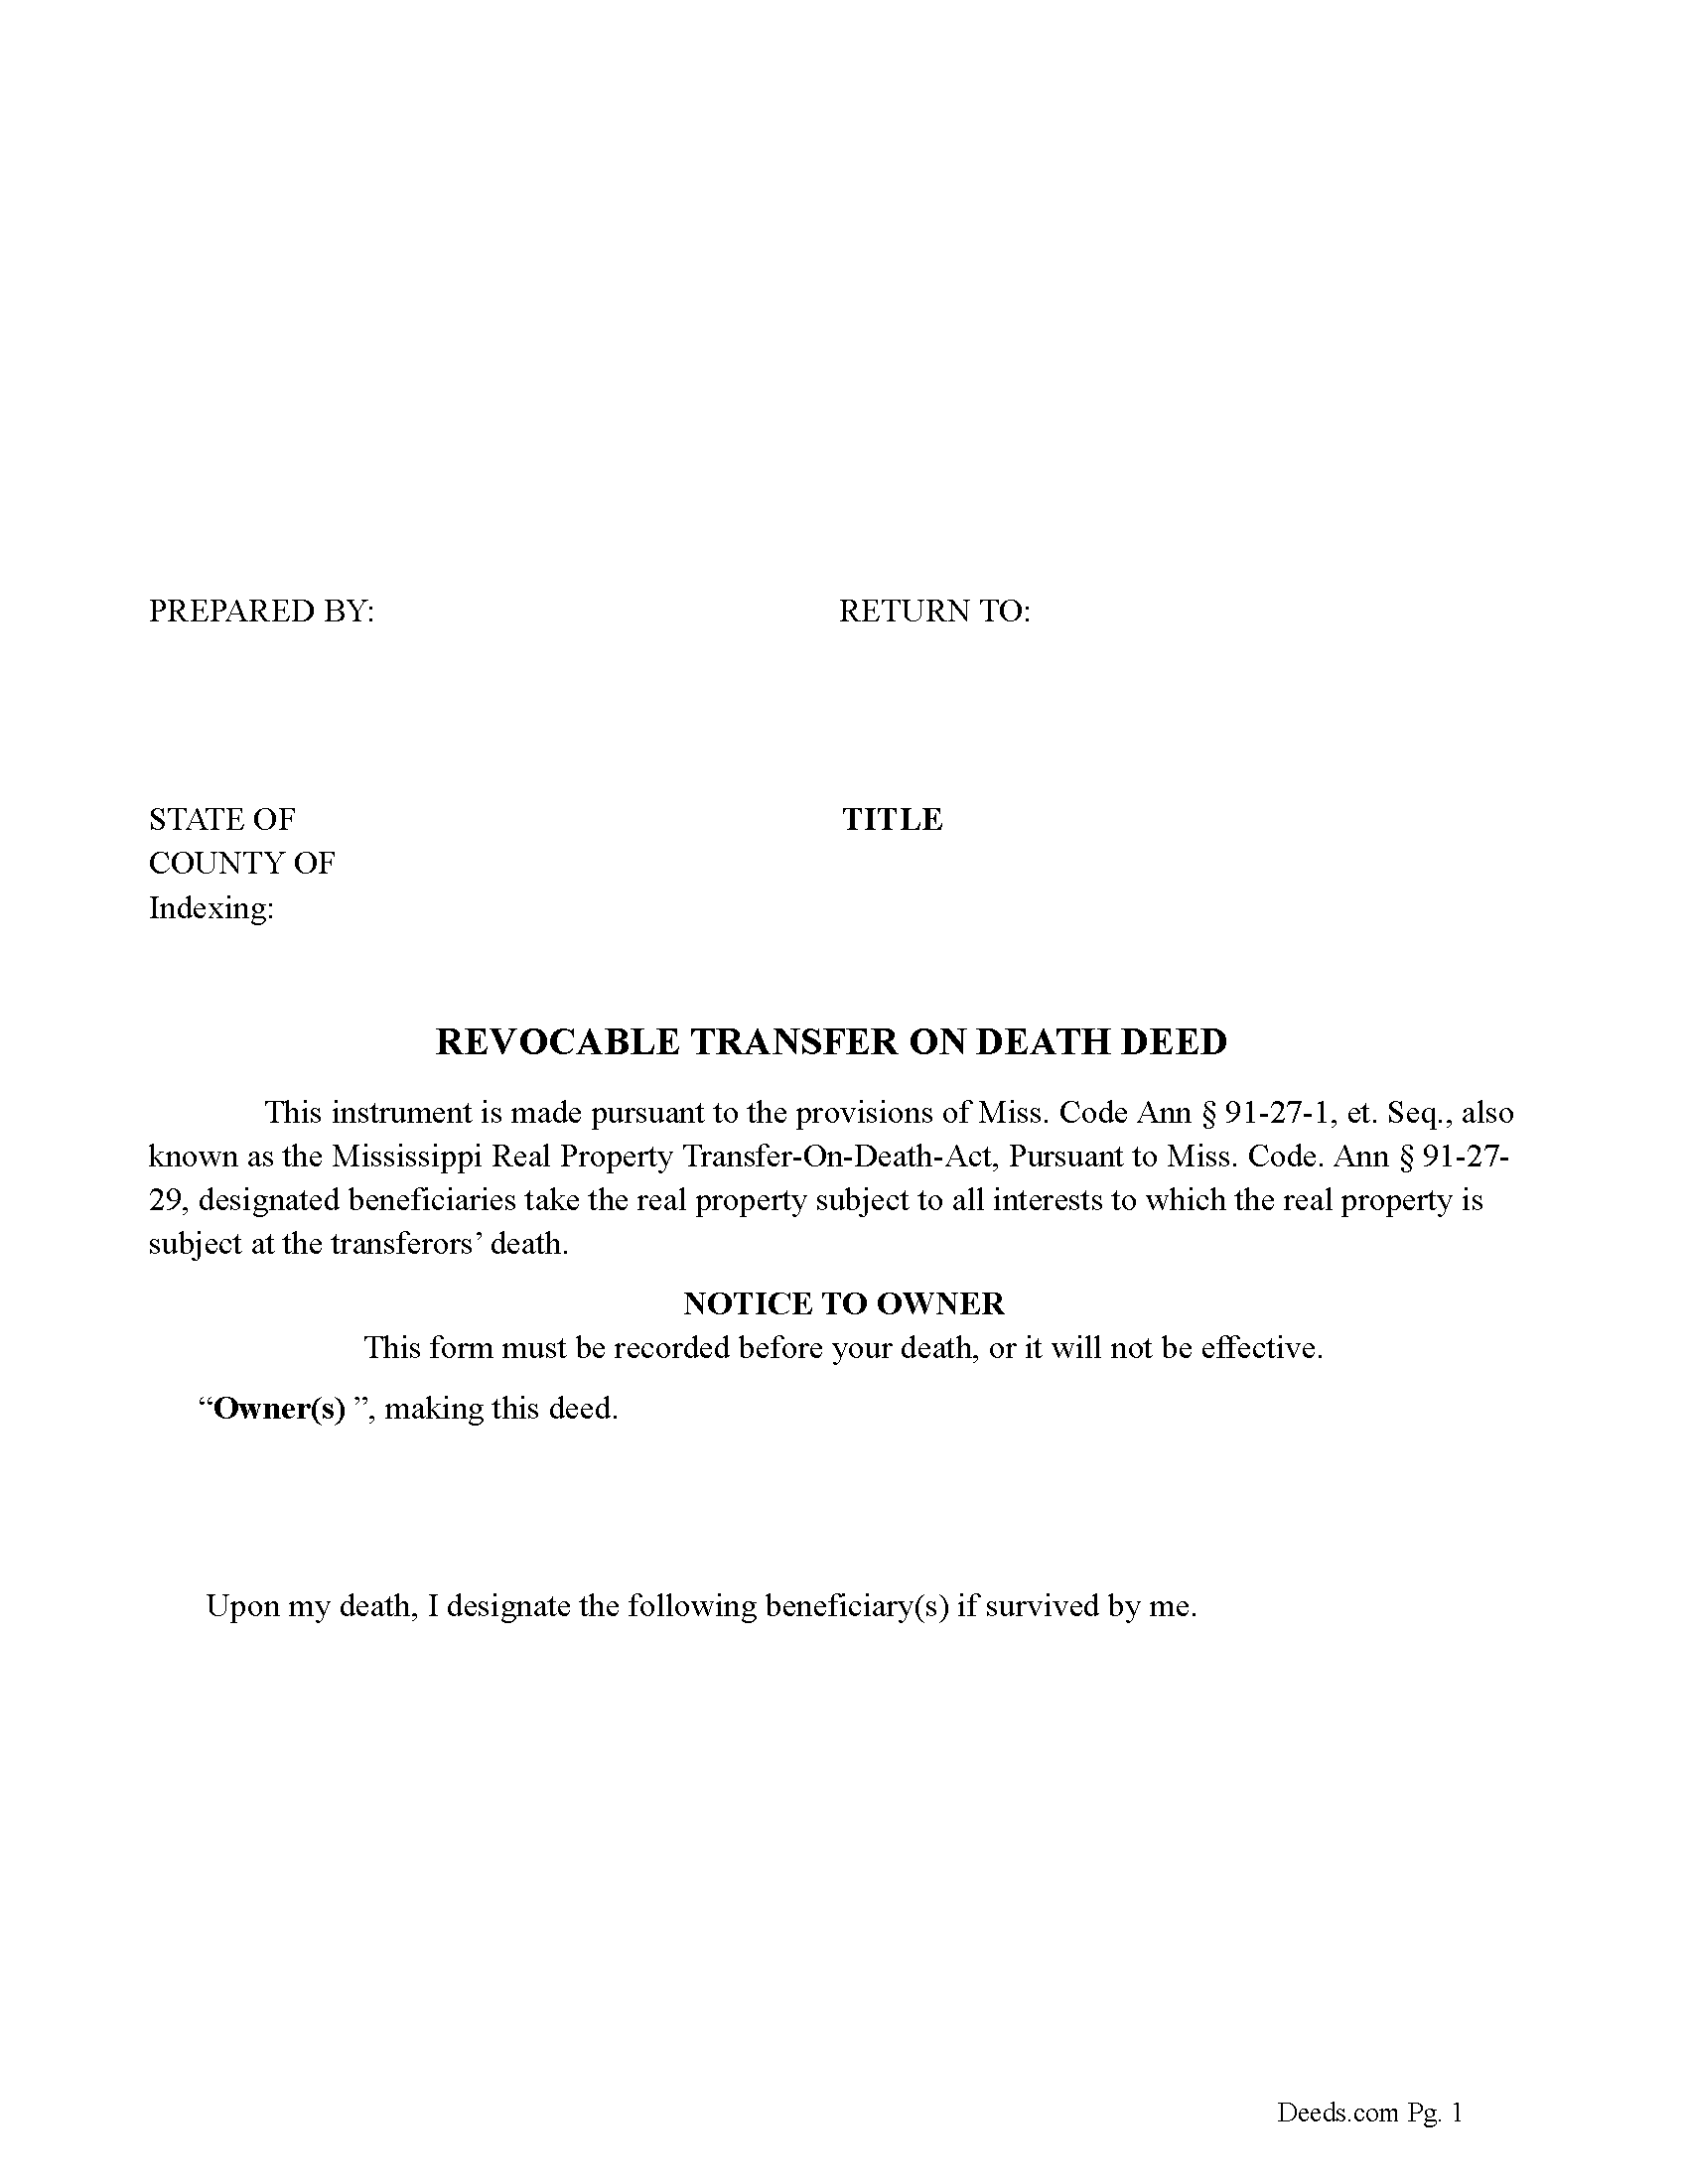 Revocable Transfer on Death Deed Form